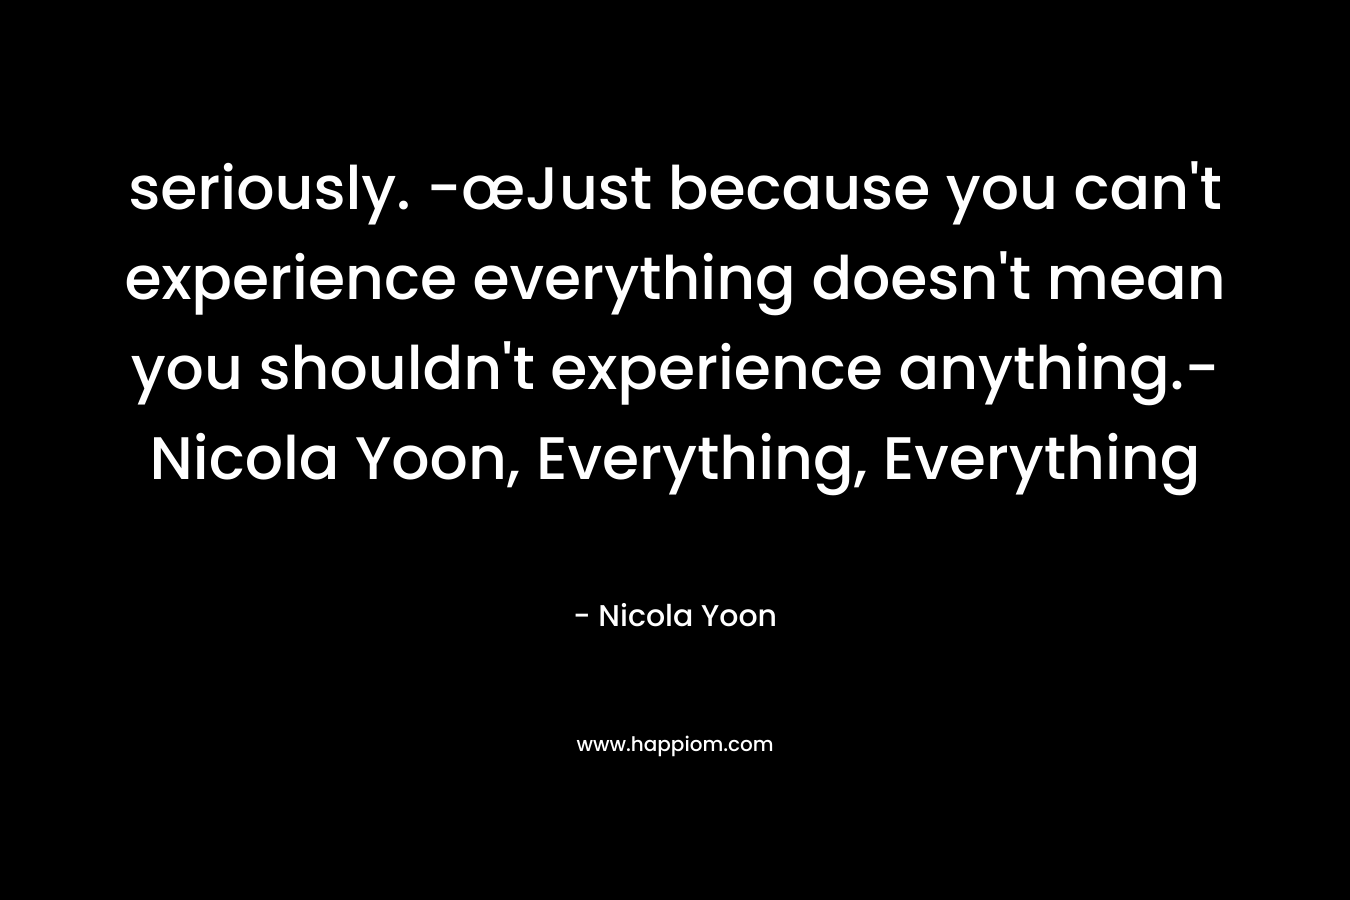 seriously. -œJust because you can't experience everything doesn't mean you shouldn't experience anything.-Nicola Yoon, Everything, Everything